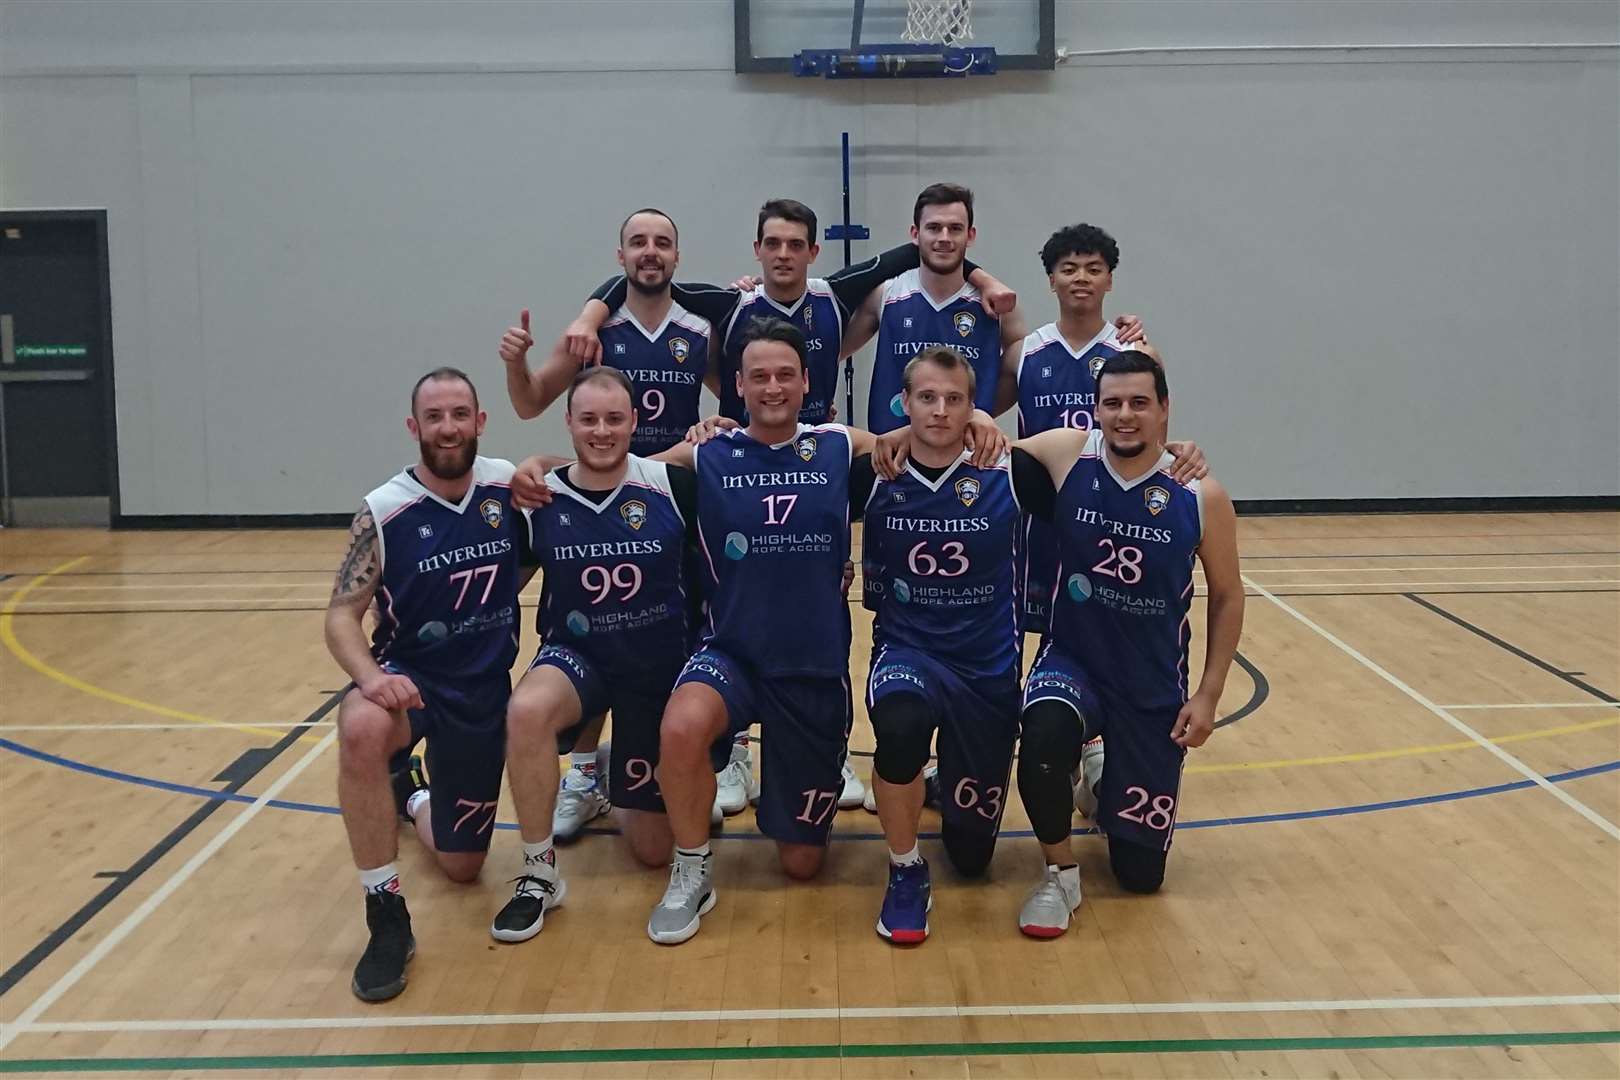 Inverness City Lions' depleted team that defeated Pleasance 81-61. Team from left to right...Back rowPeter Gounaris (Cpt), Maciej Splawski (Cpt), Hamish Young, Ralph Panlilio.Front rowRuaraidh MacLennan, Steven Ednie, Andy Pearson, Janis Bakis, Madars Baldins.